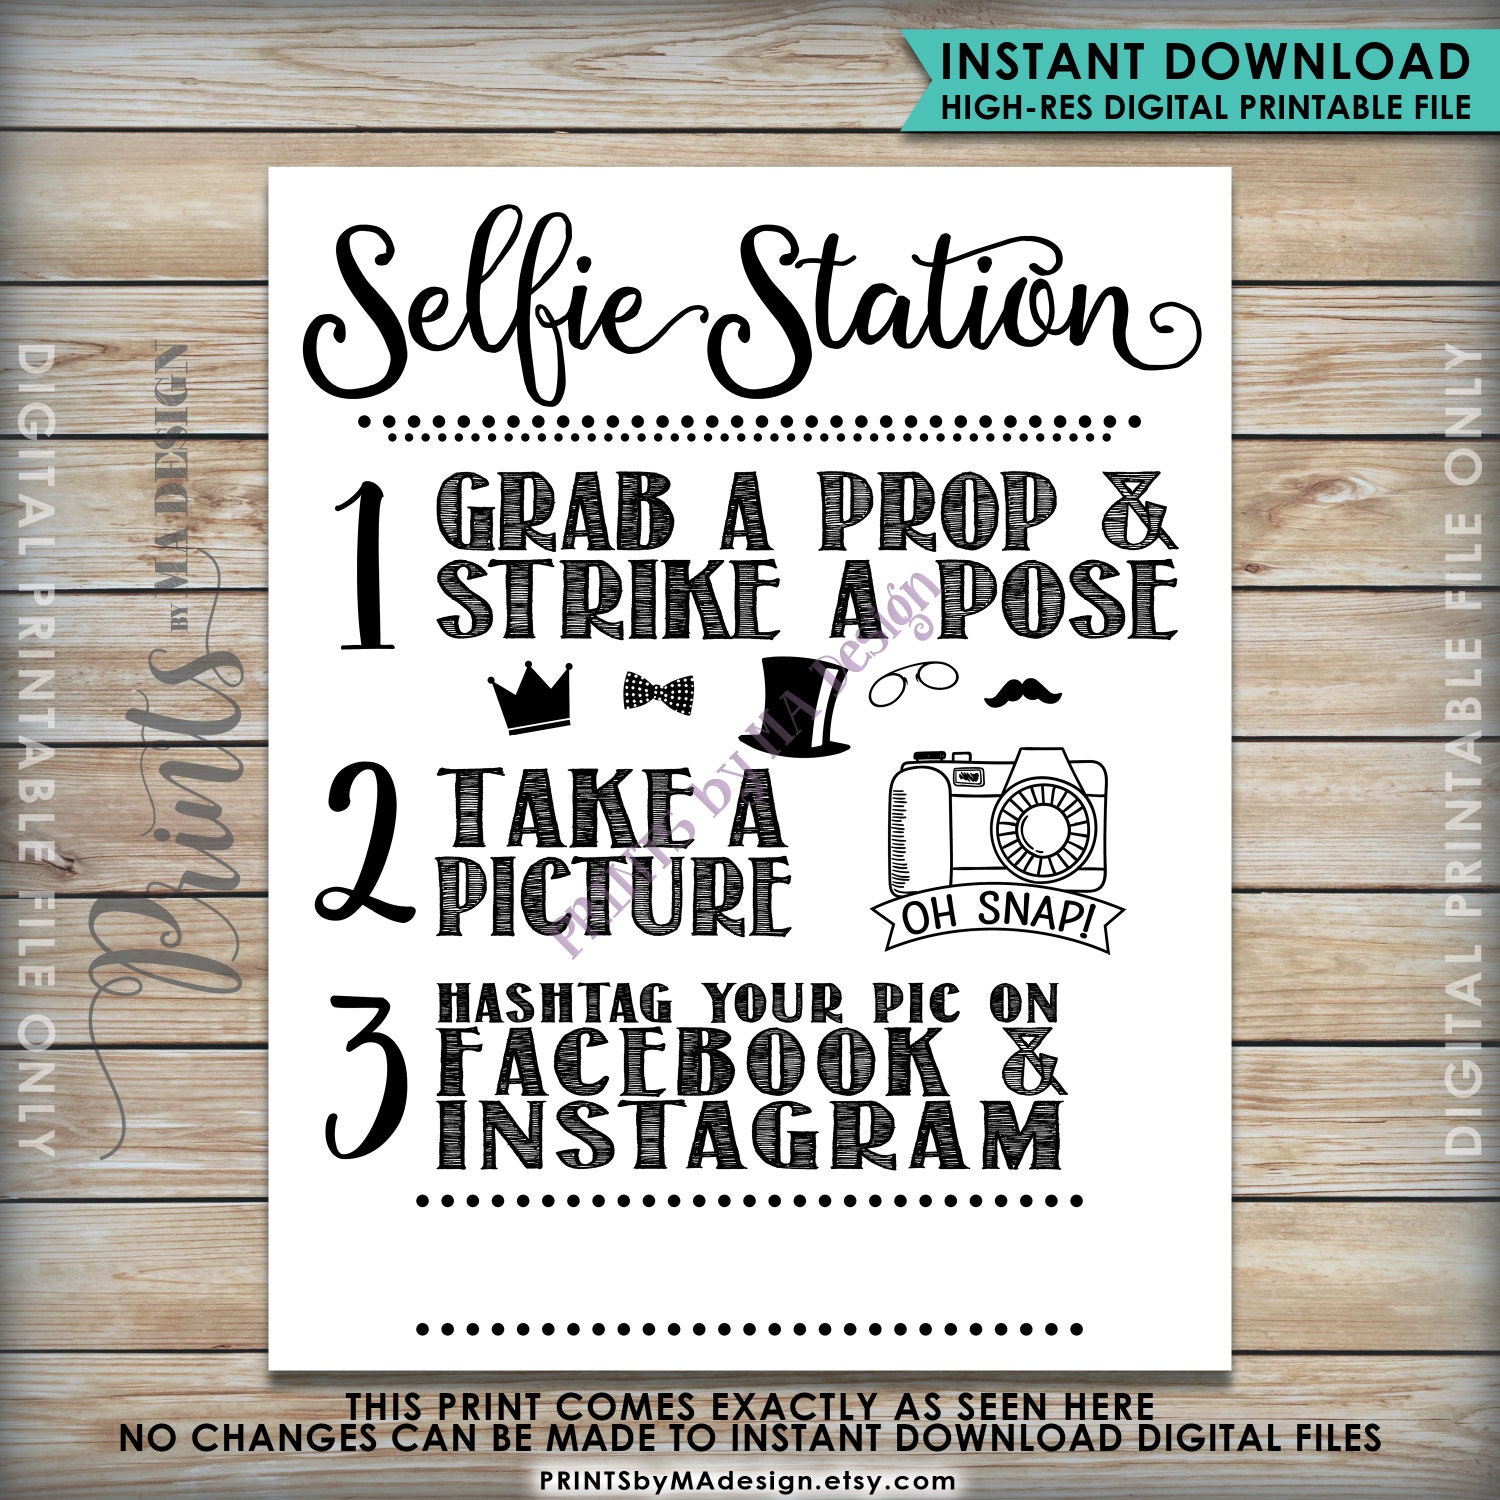 selfie-station-sign-share-your-pic-on-social-media-snap-a-photo